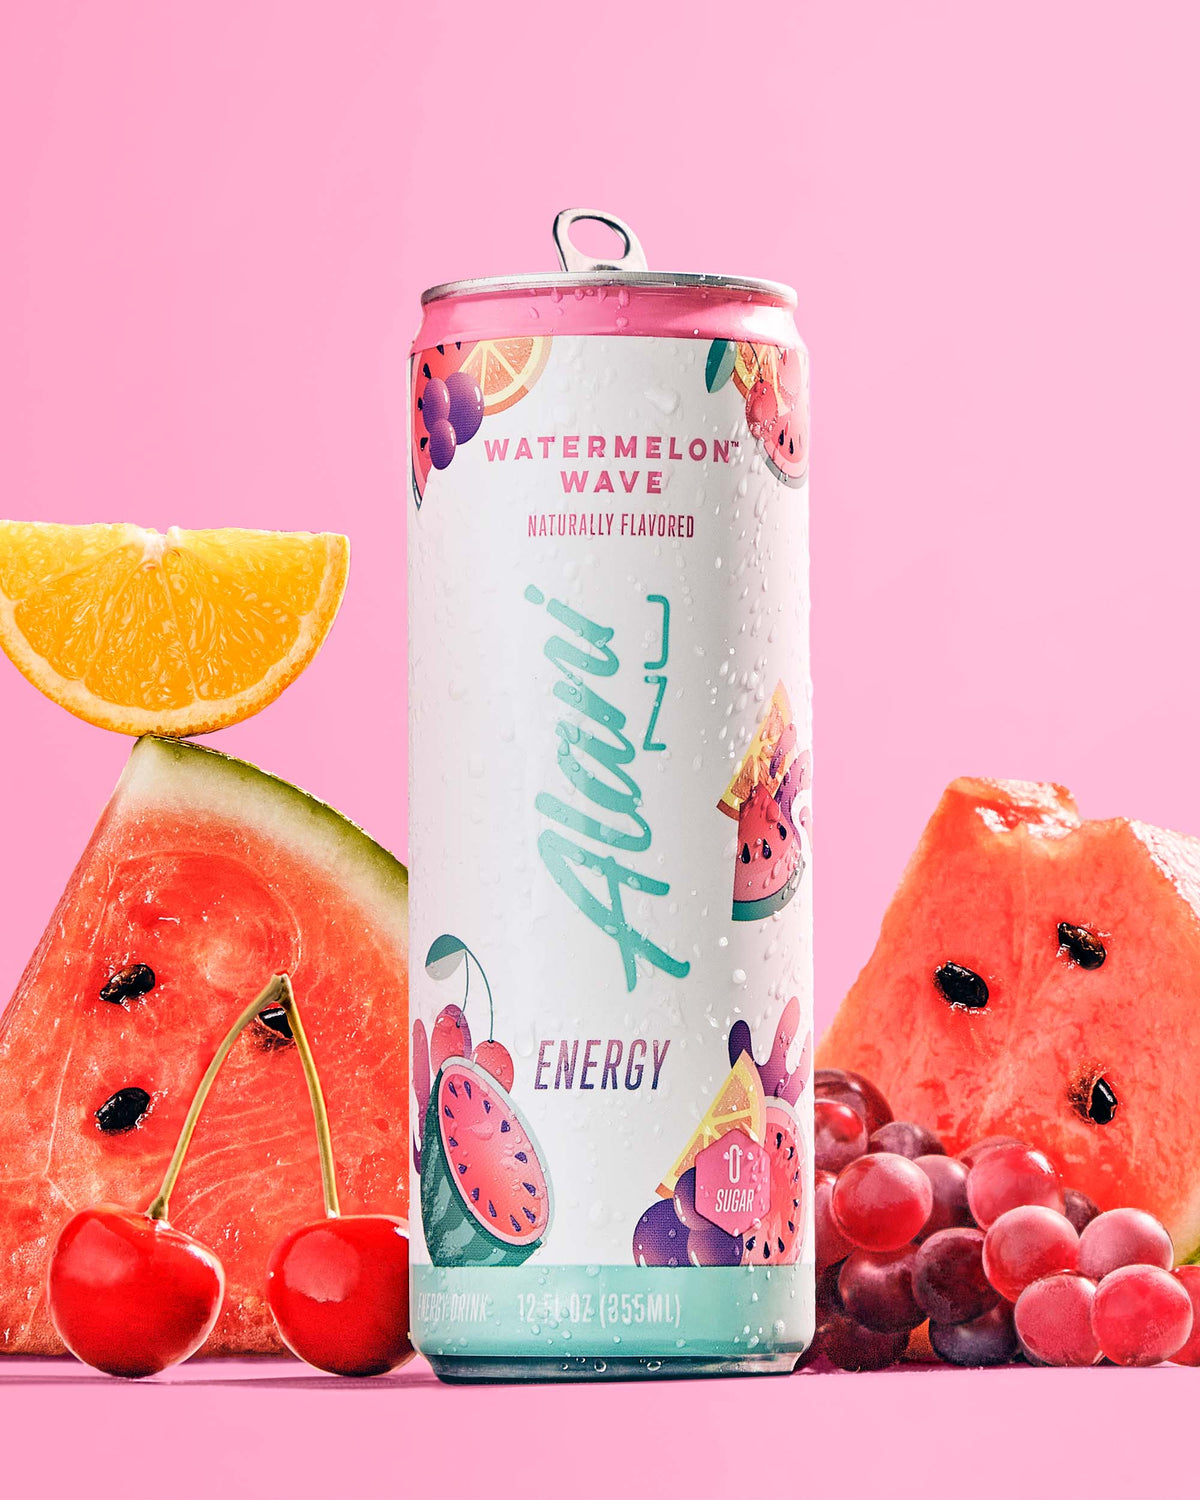 A Energy Drink in Watermelon Wave flavor next to tropical fruits.